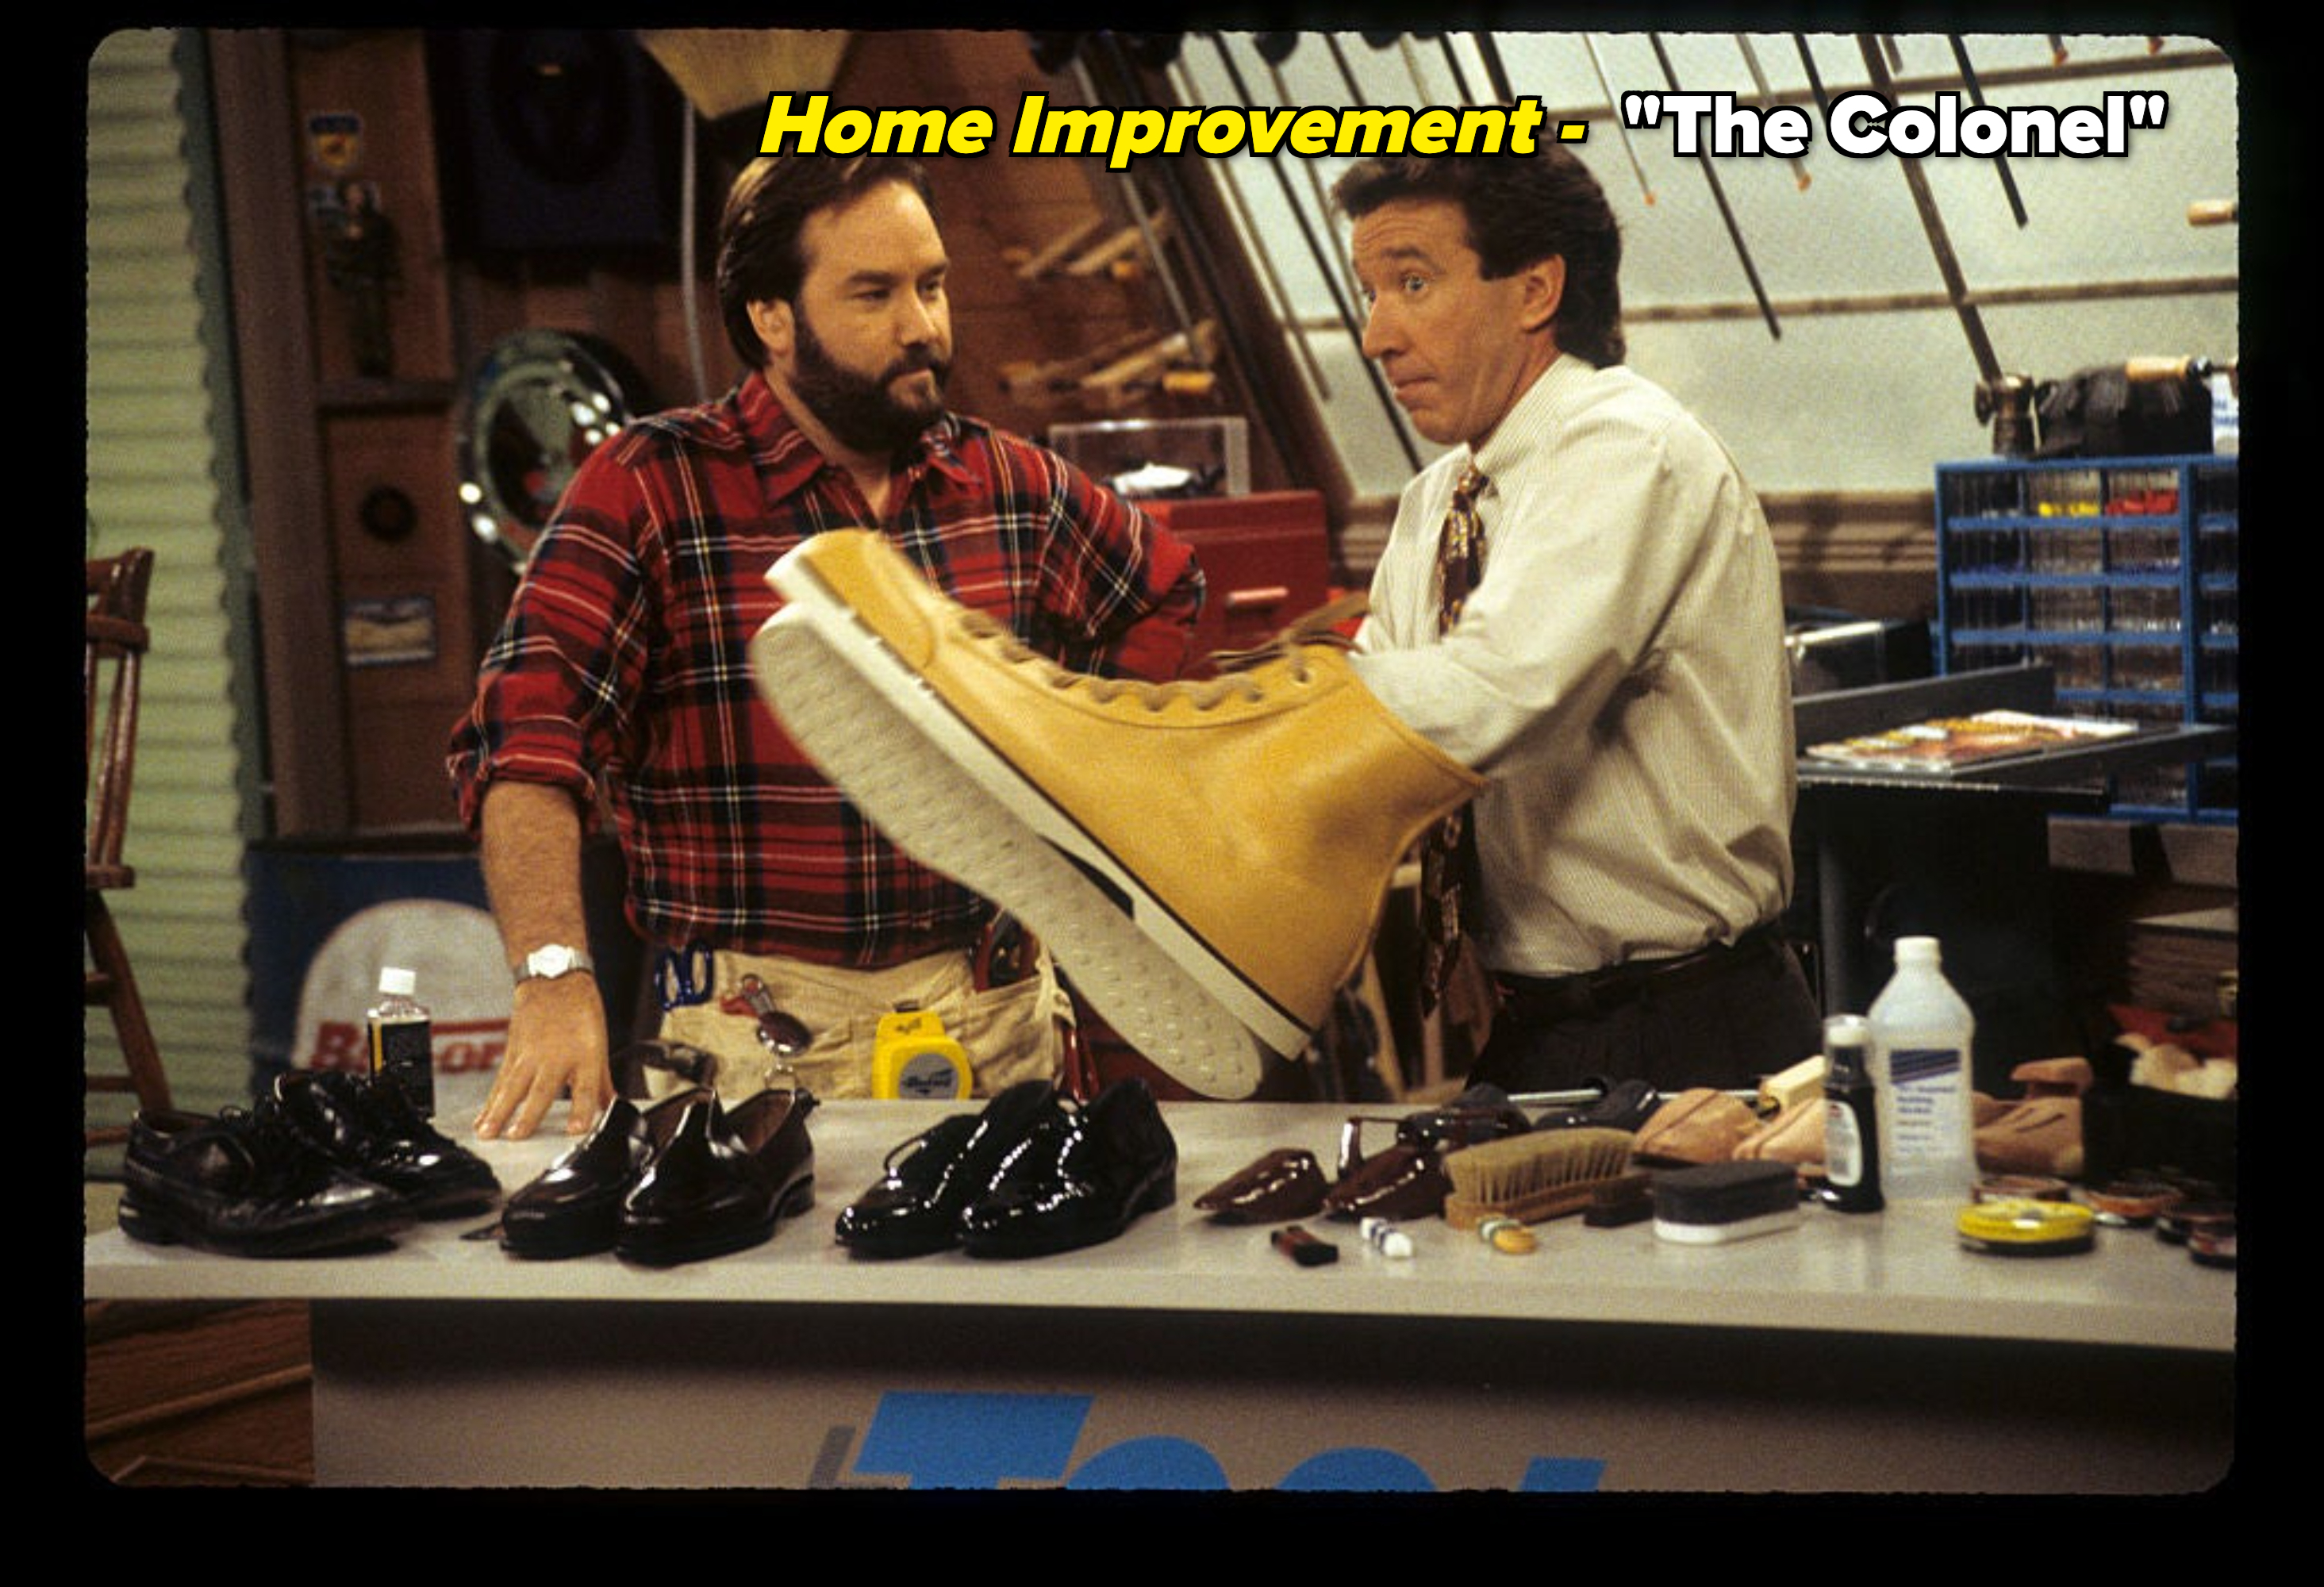 Two men on a TV show set, one holding a large boot, surrounded by various shoes and tools